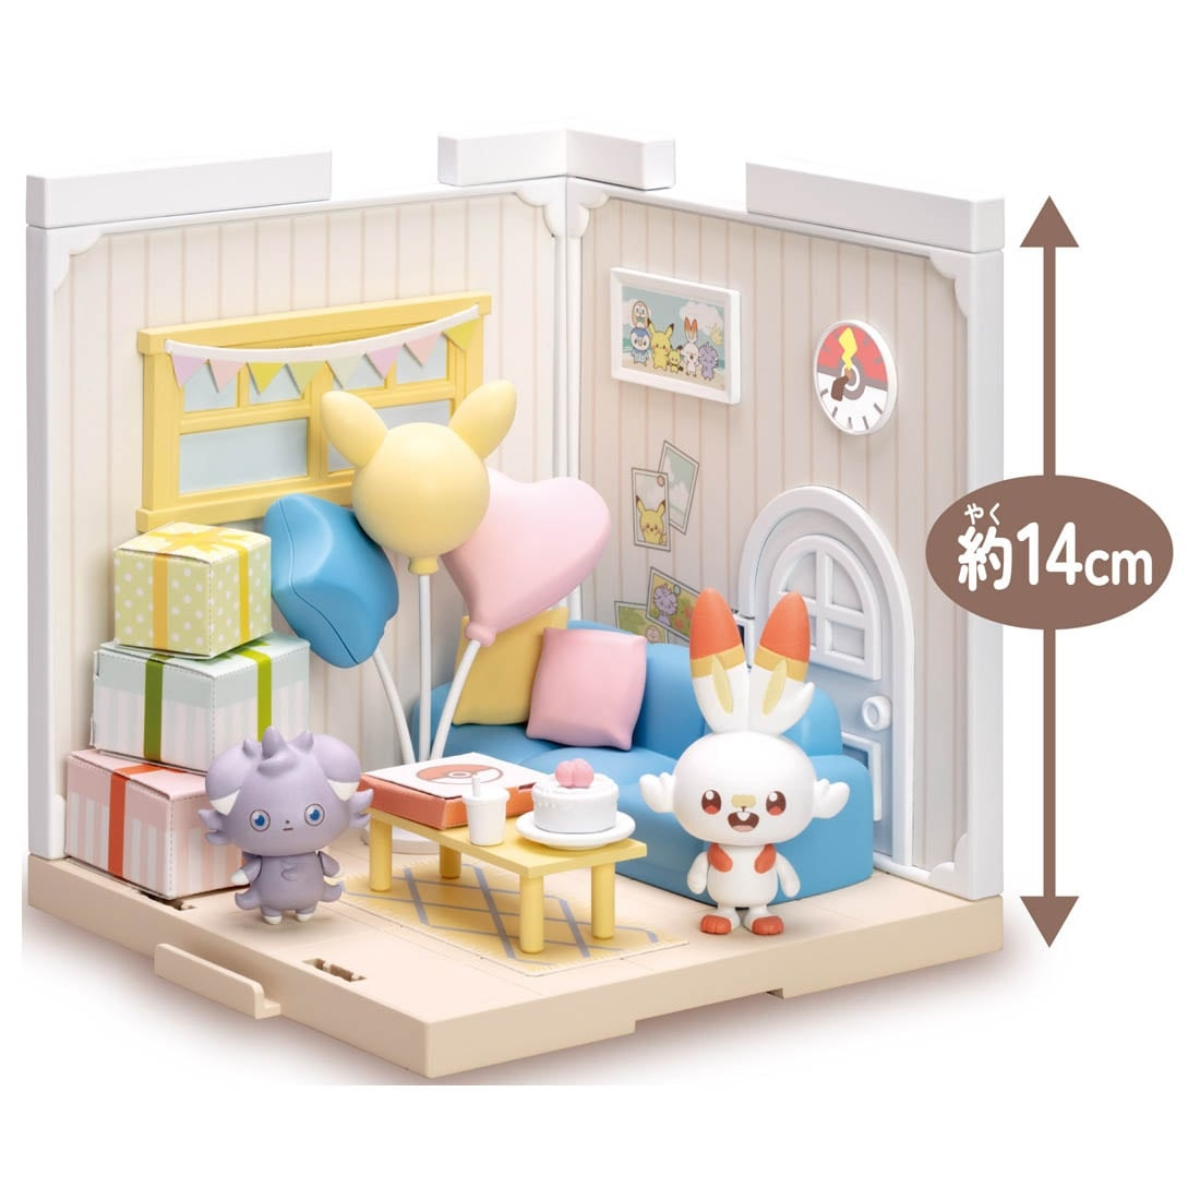 Pokemon Pokepeace House Lounge &quot;Scorbunny &amp; Espurr&quot;-Takara Tomy-Ace Cards &amp; Collectibles